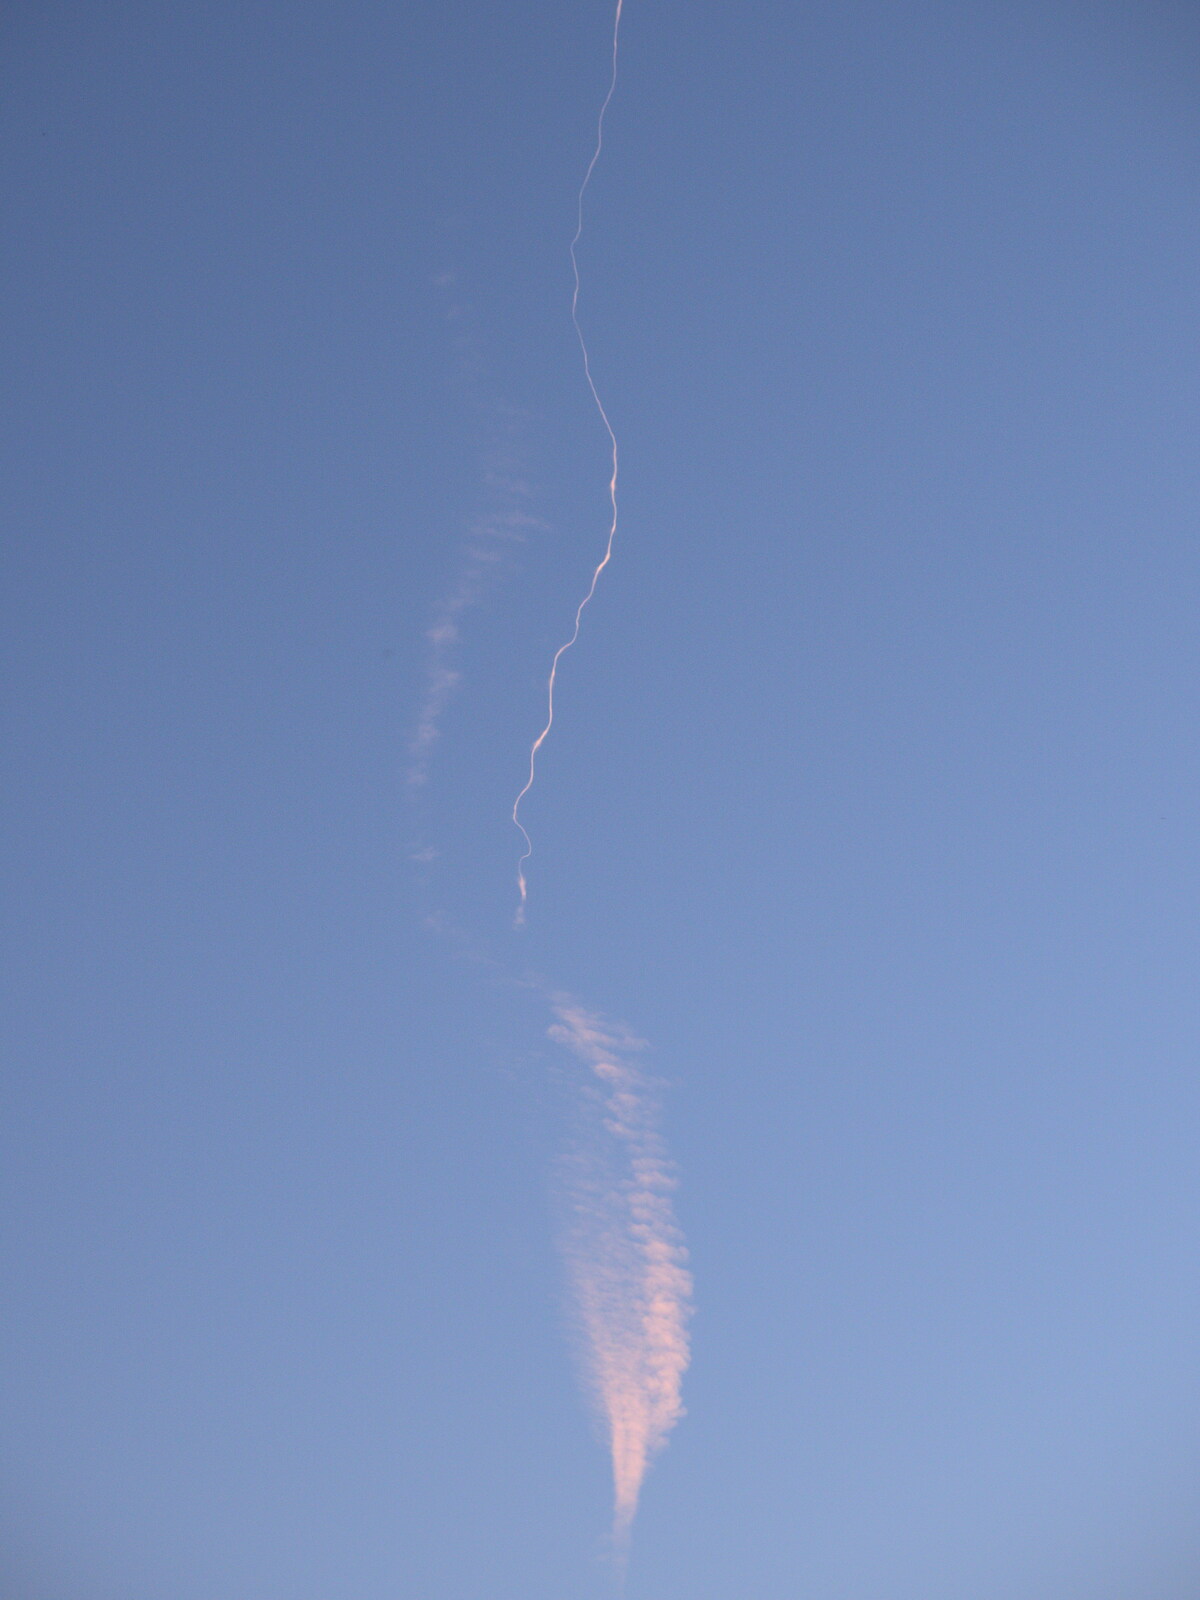 There's an interesting contrail in the sky from A Visit to the Kittens, Scarning, Norfolk - 13th June 2021